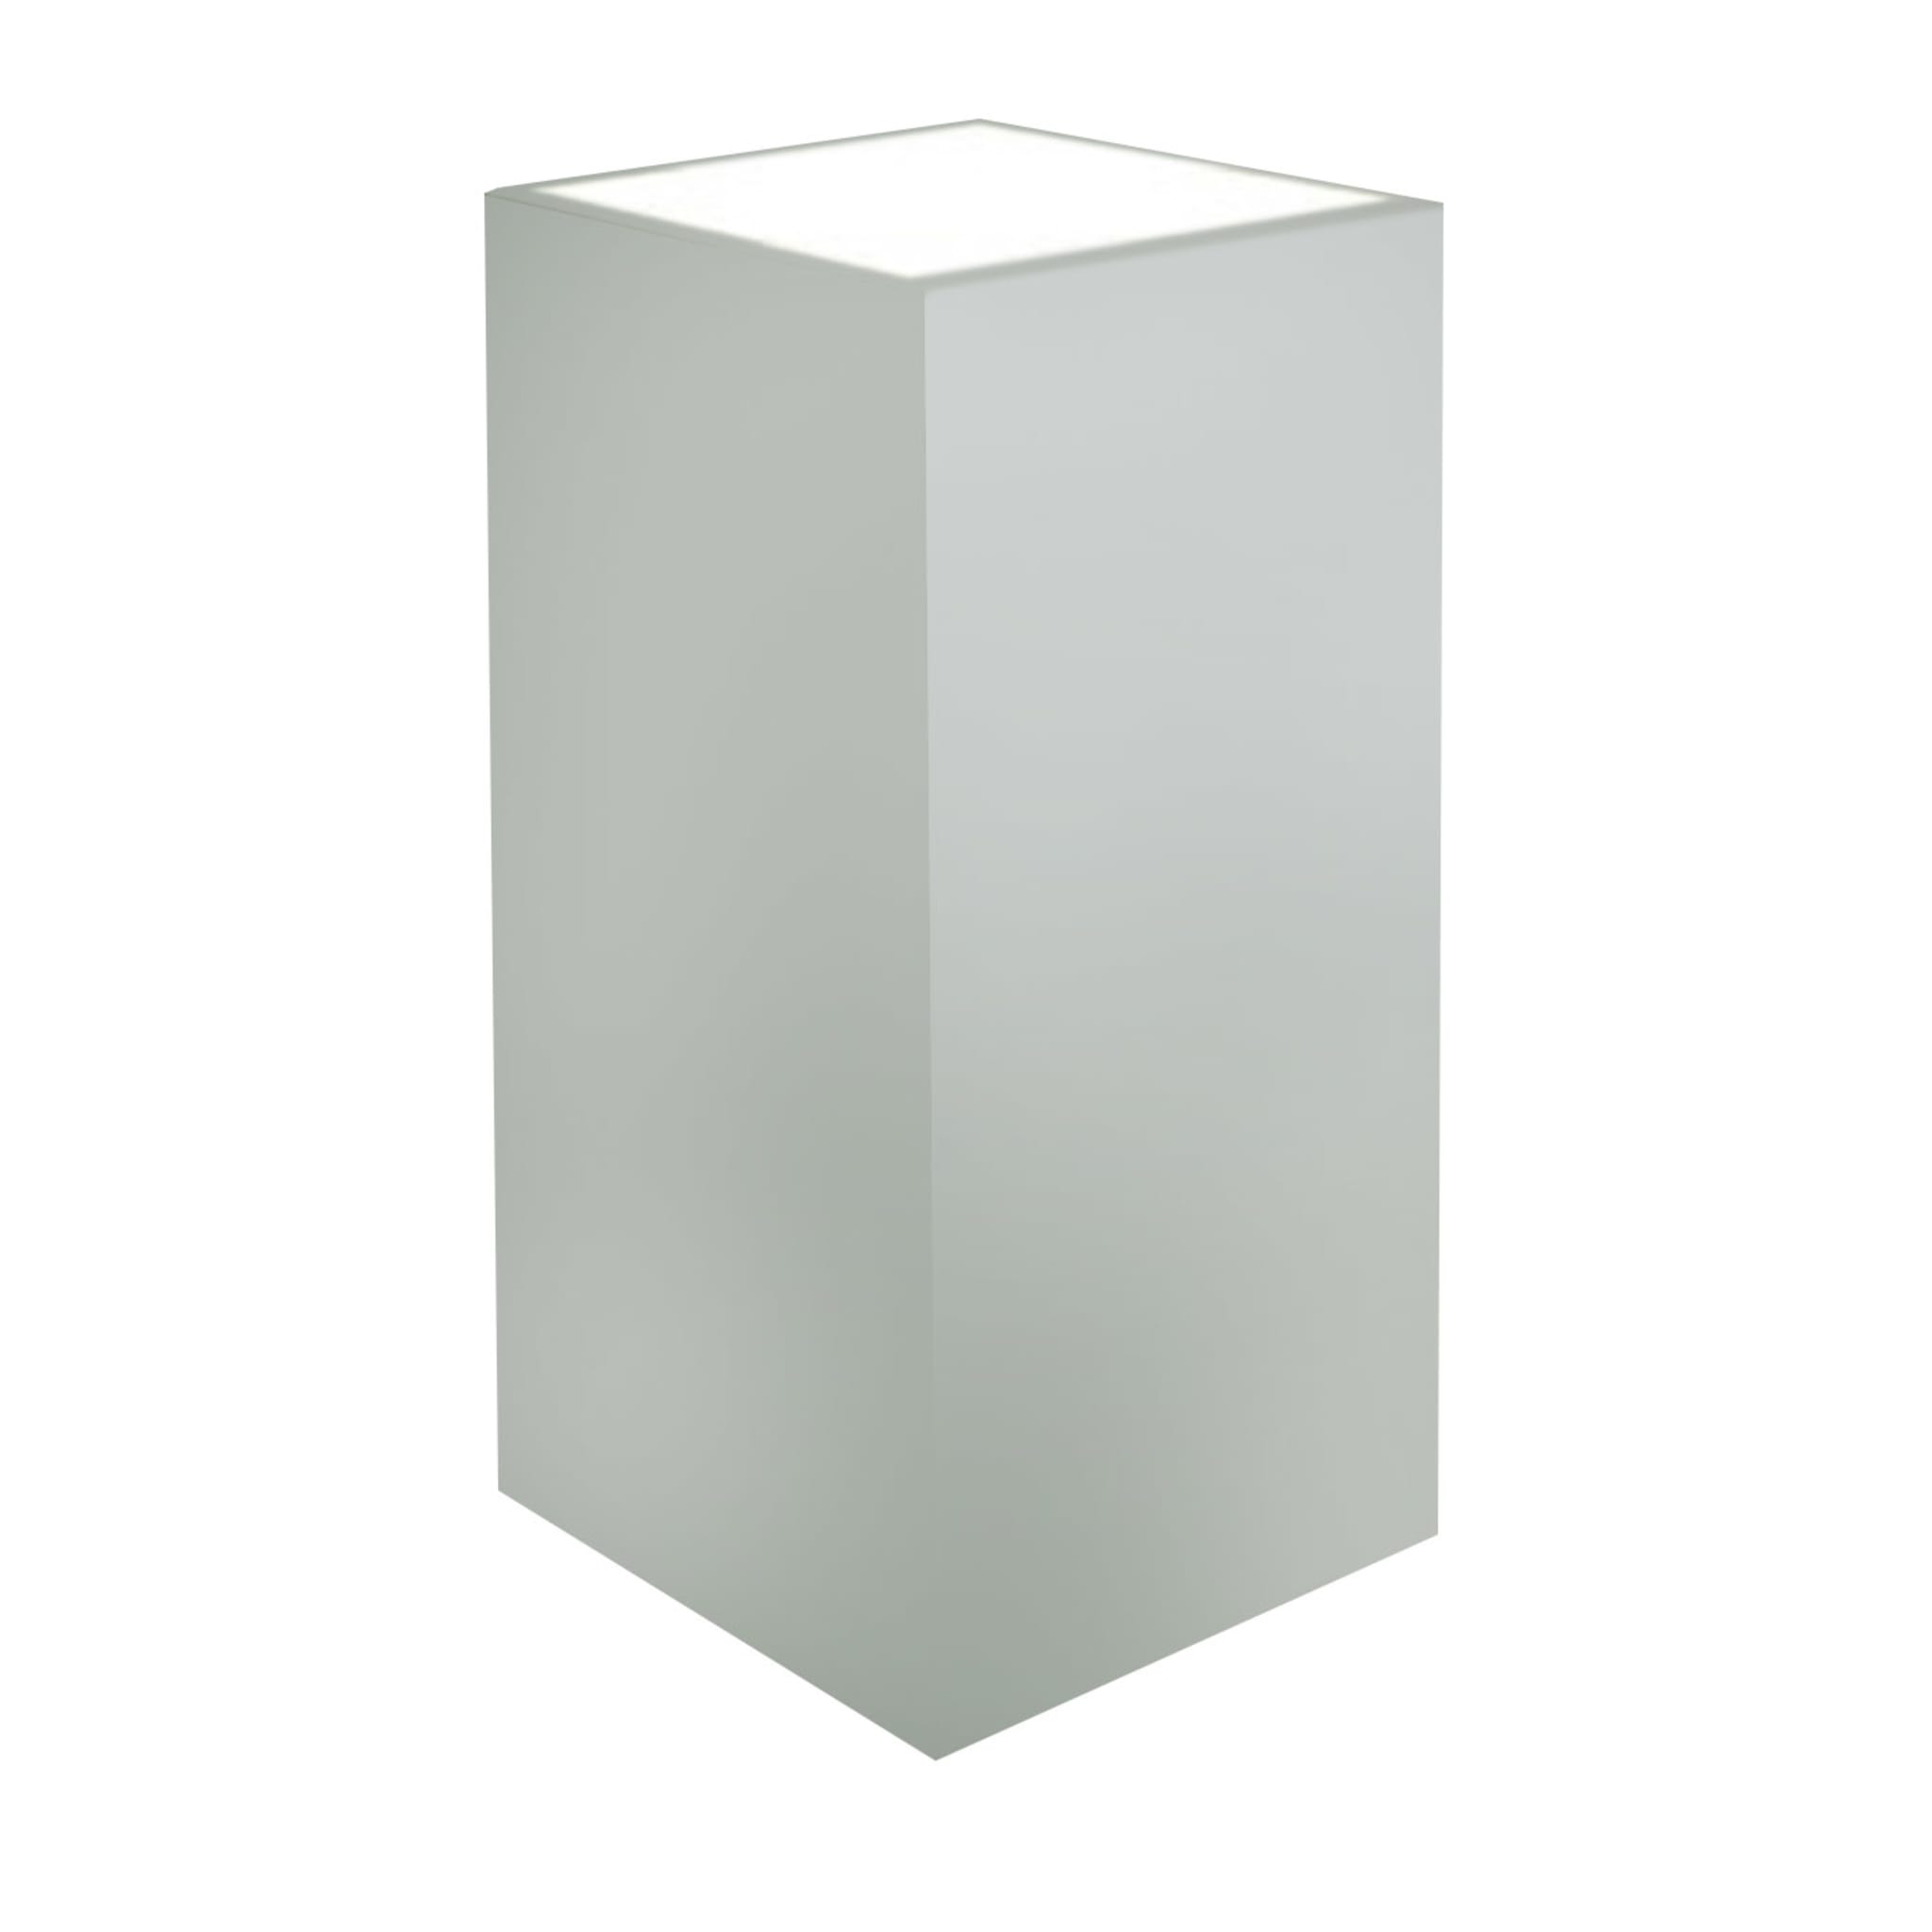 Light Gallery Luxury Cubo 400 White Floor Lamp by Marco Pollice - Main view